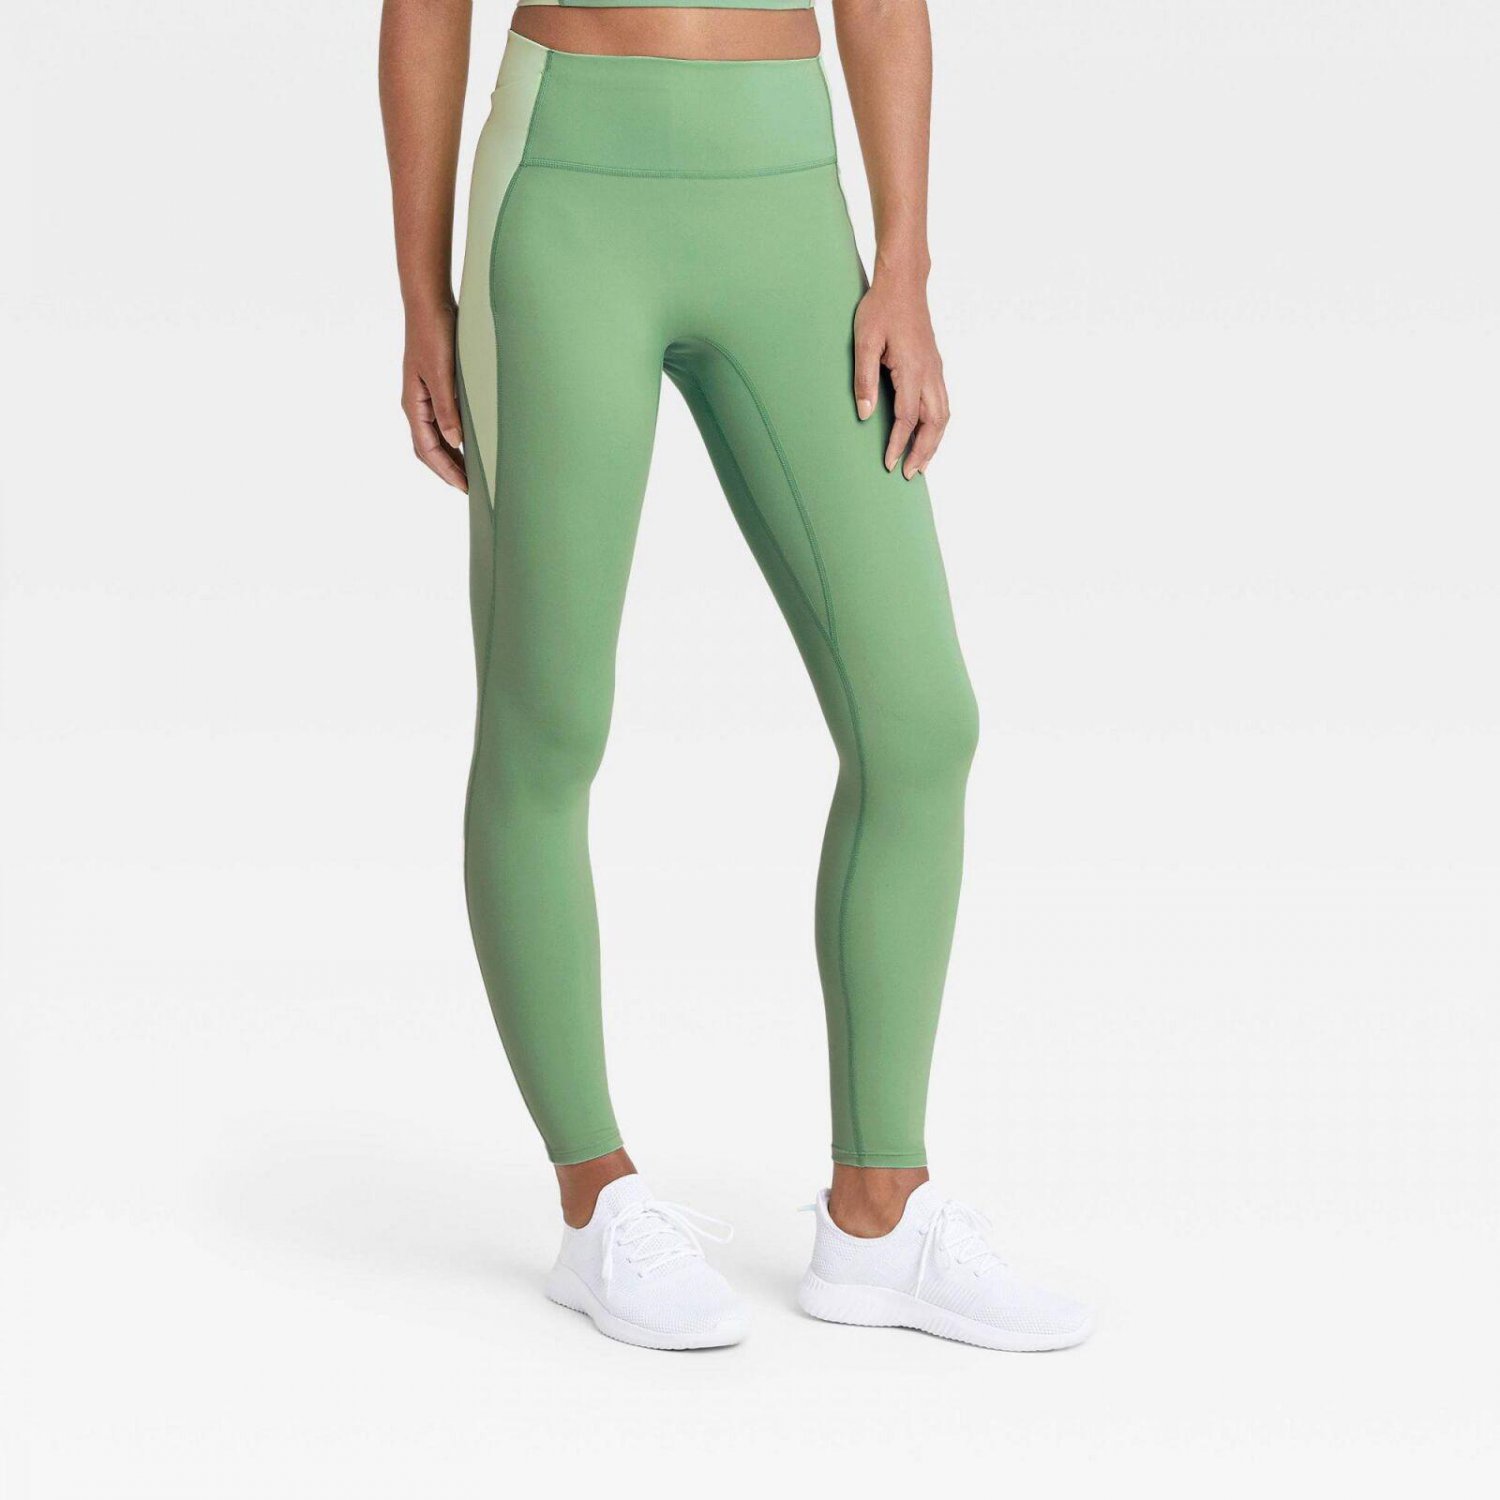 NWT All In Motion Women's Brushed Sculpt High-Rise Leggings XL Green